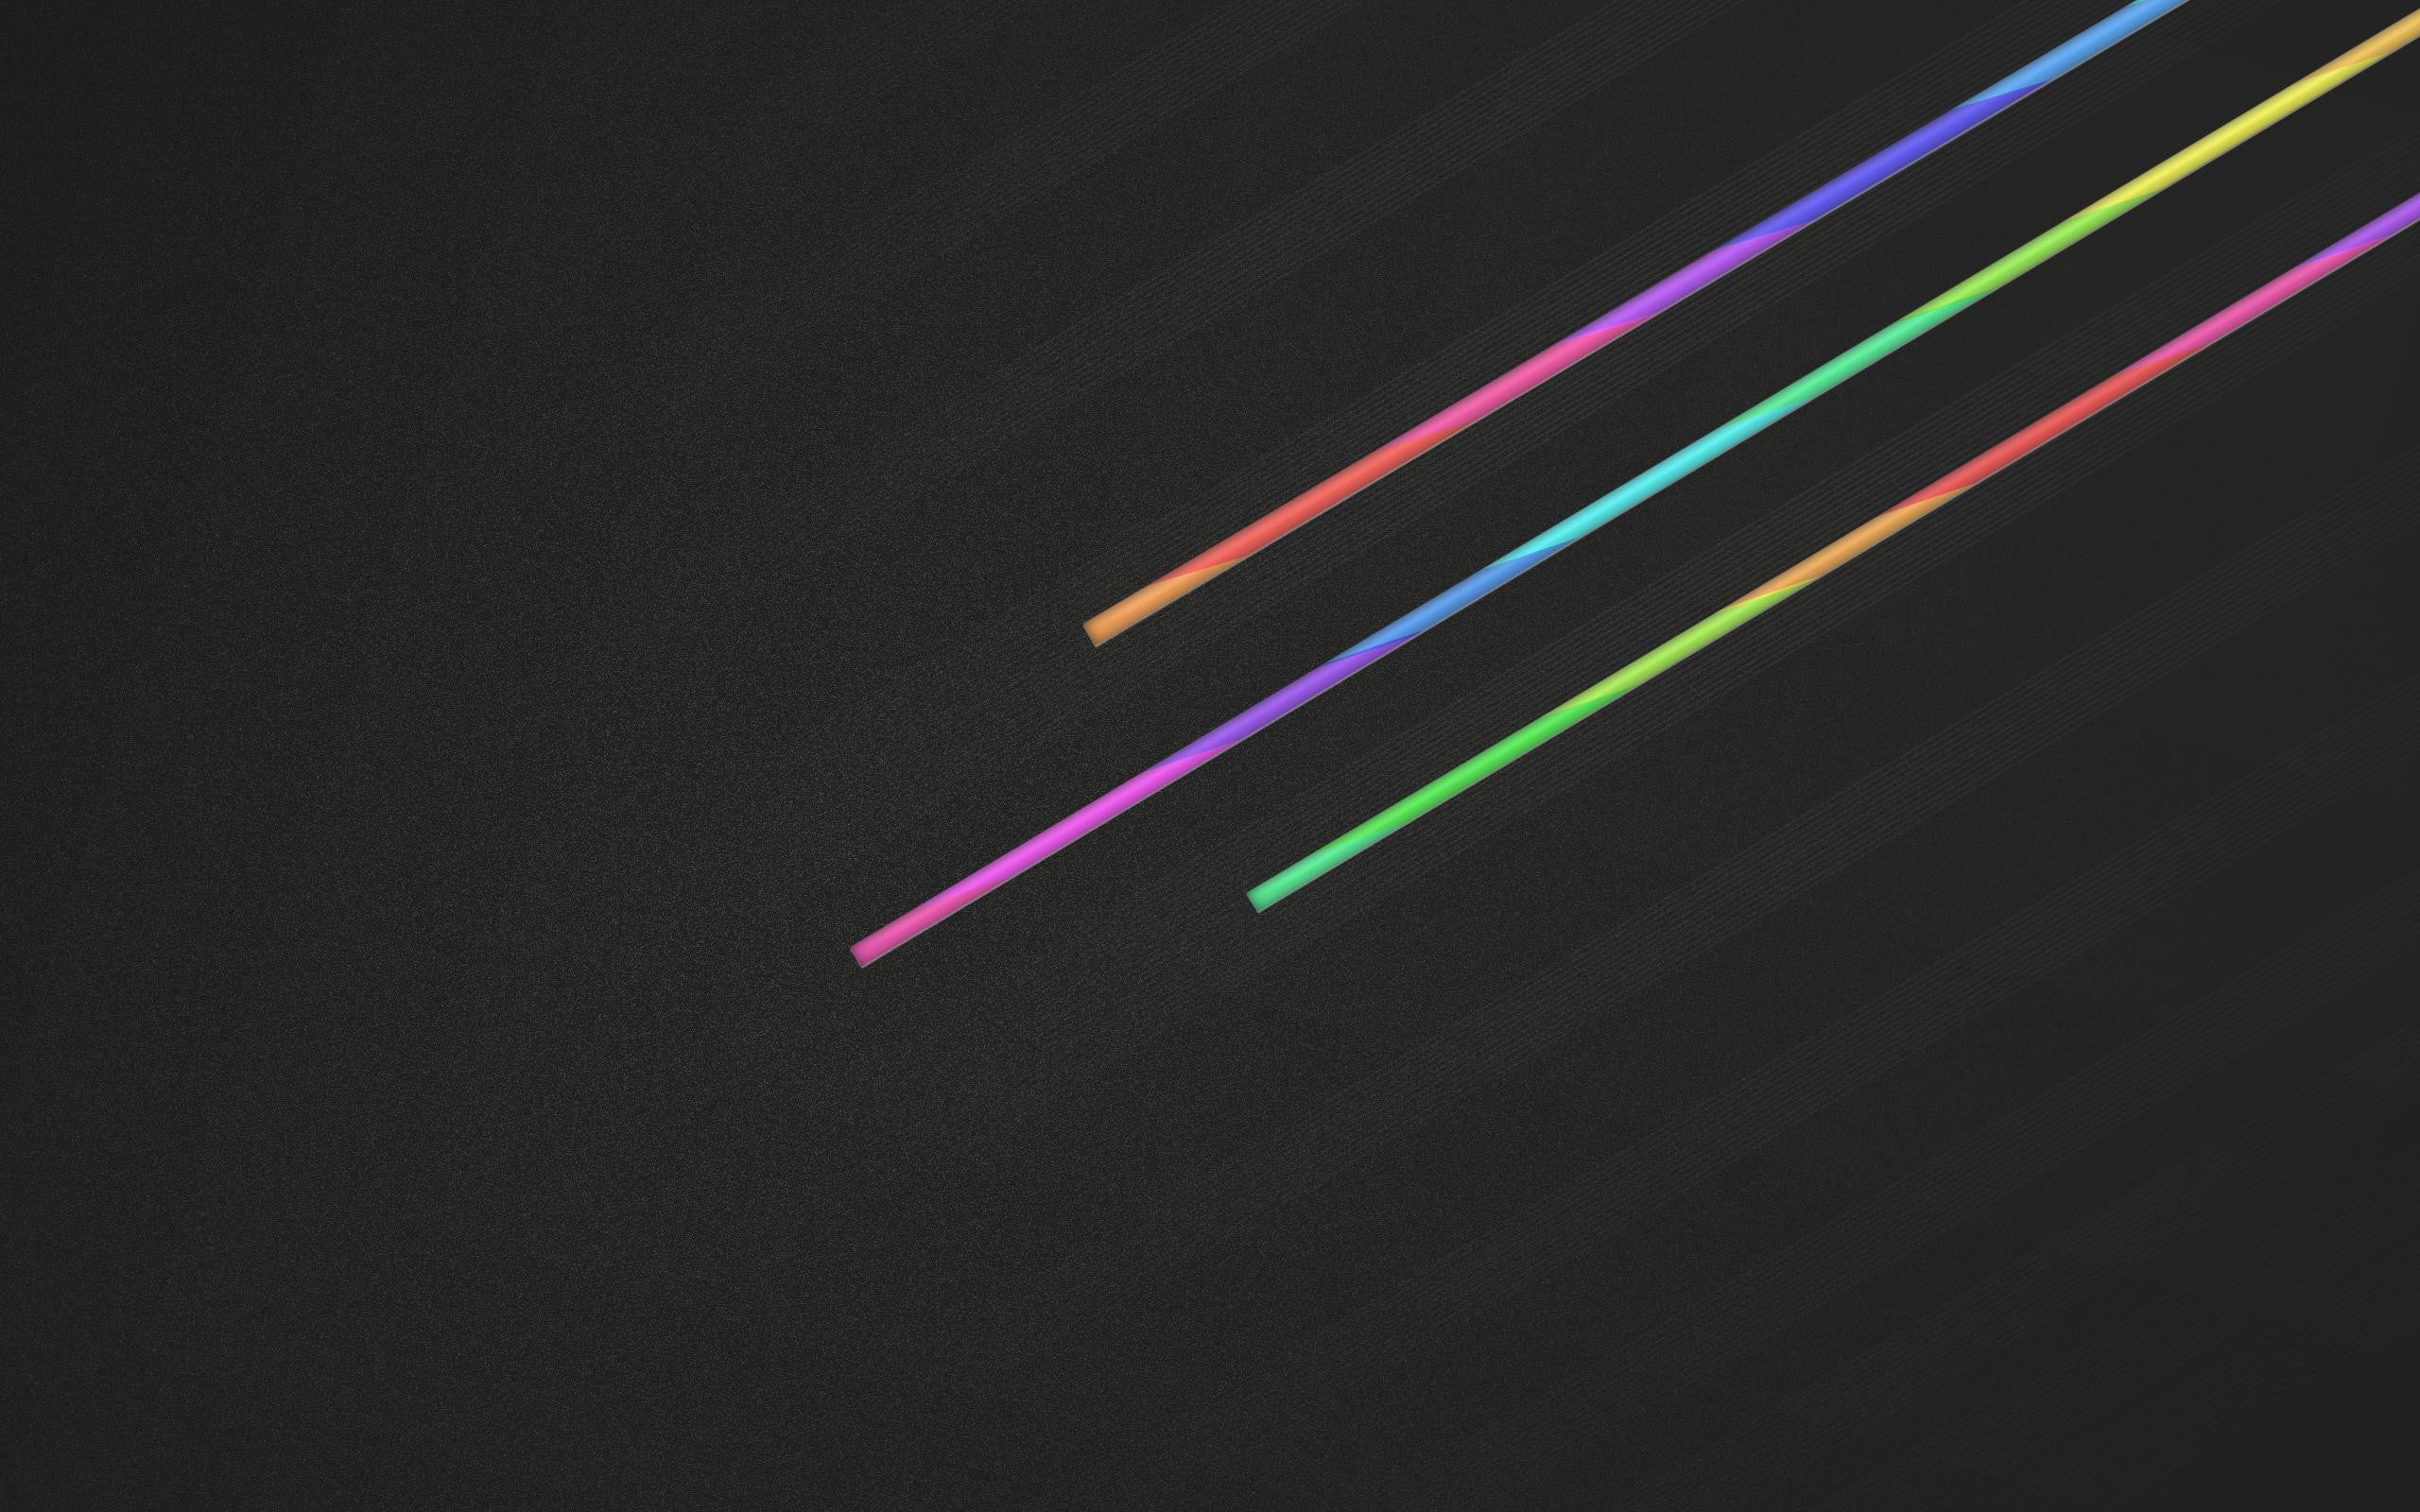 multicolored parallel lines, simple background, indoors, close-up